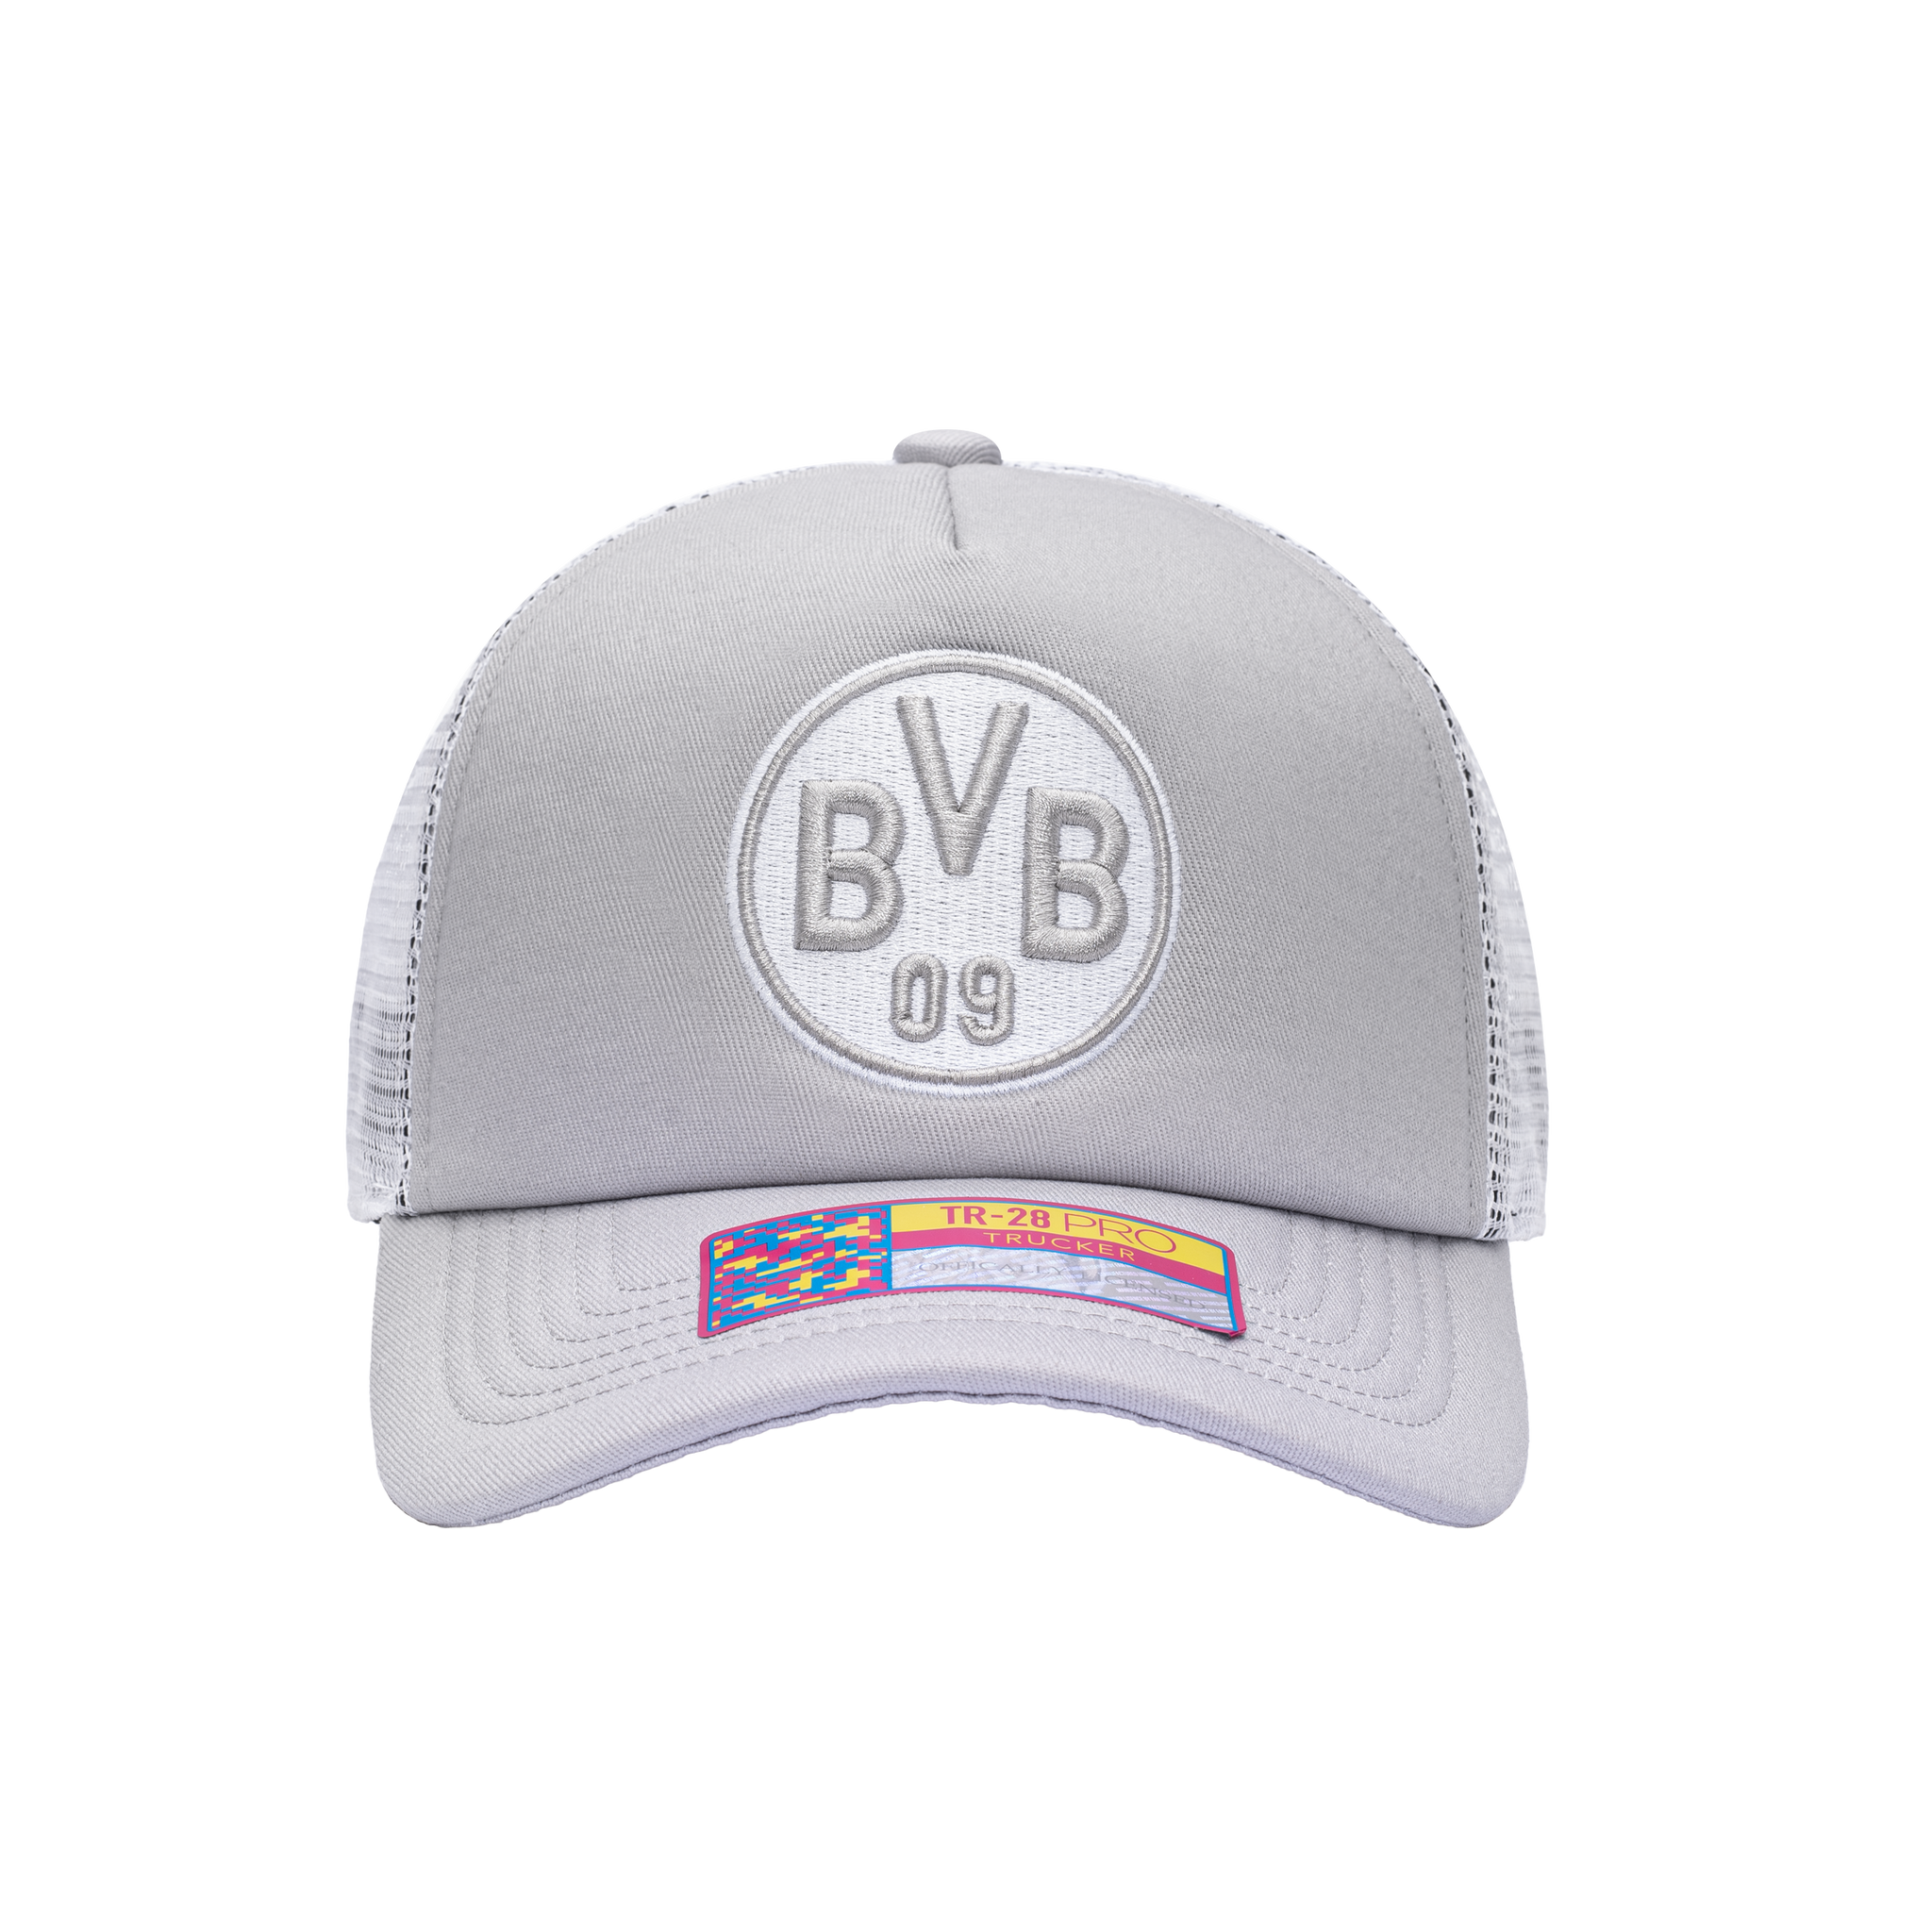 Front view of the Borussia Dortmund Fog Trucker Hat in Grey/White, with high crown, curved peak, mesh back and snapback closure.